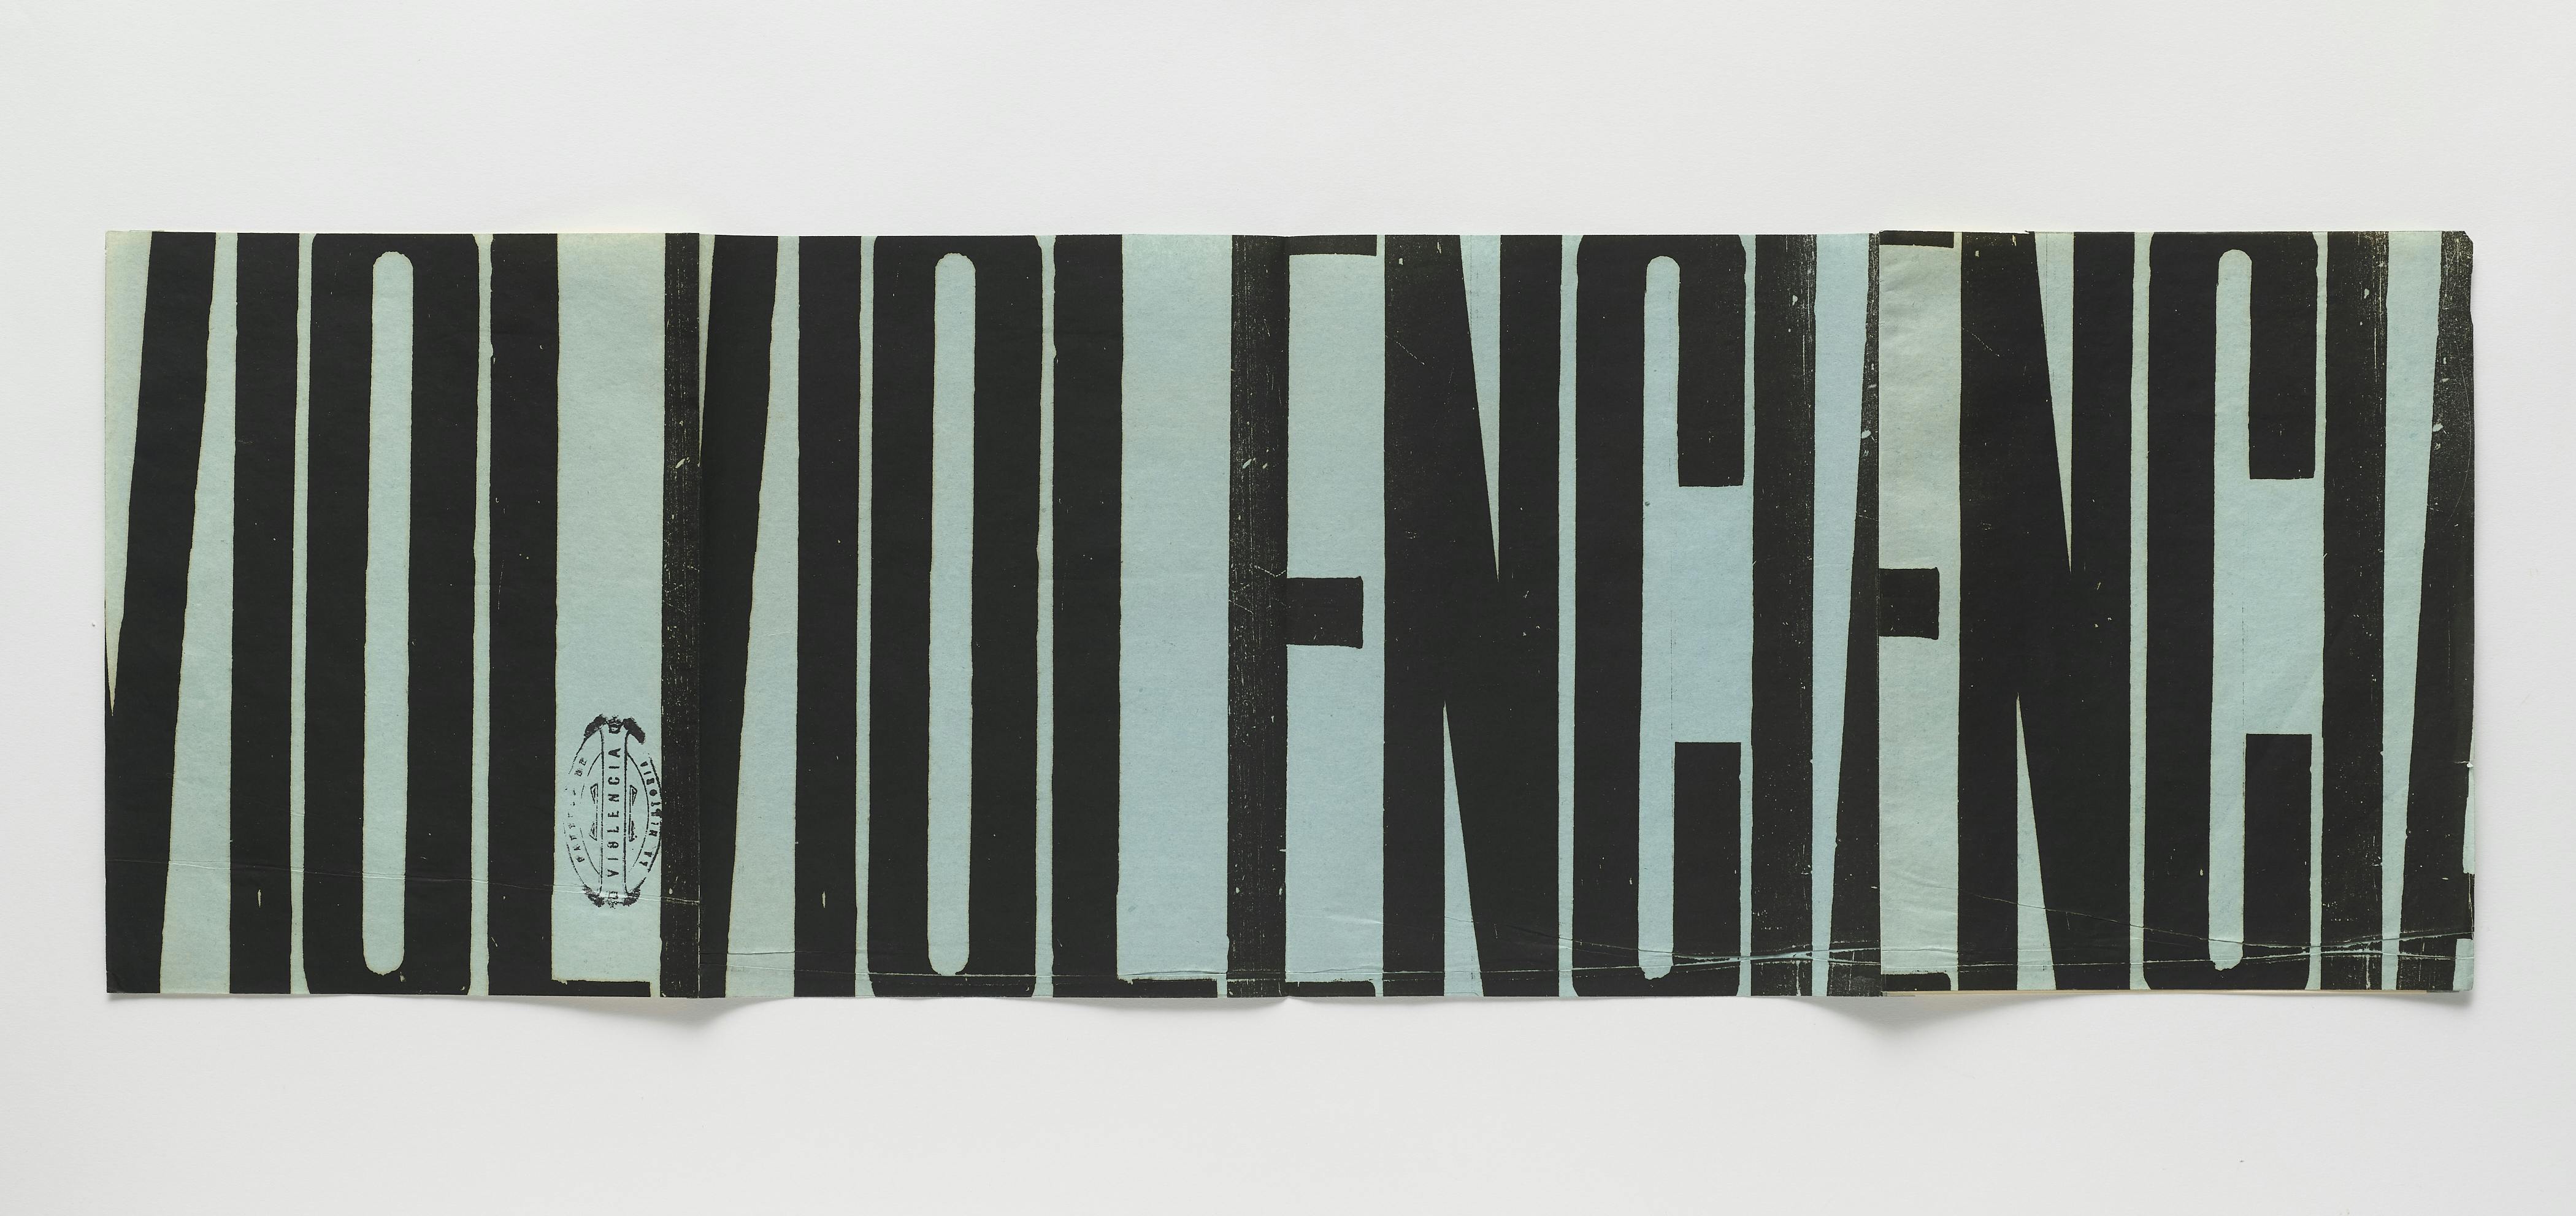 A poster on blue paper with black letters as tall as the paper itself, some fragmented and some whole. From left to right, the poster reads, “VIOL VIOL ENCIA ENCIA.”